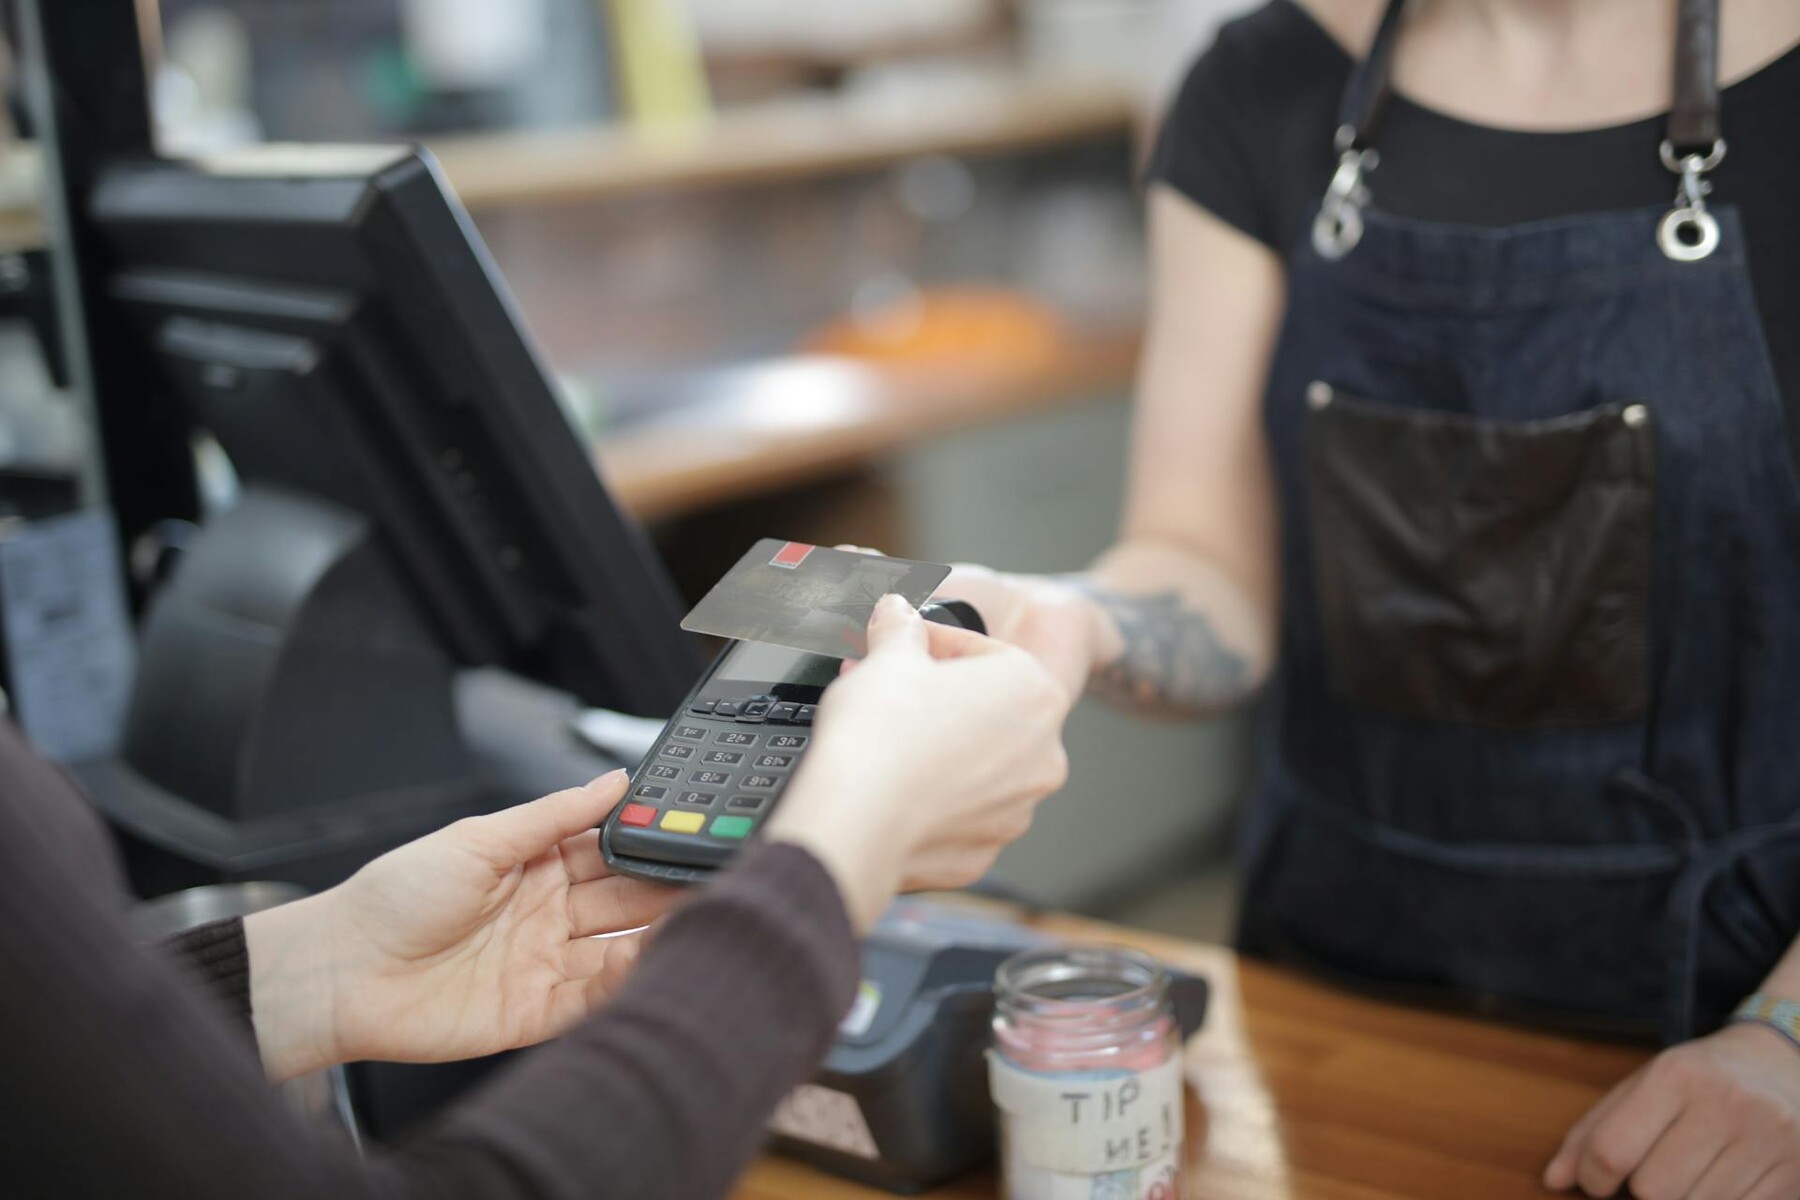 A woman paying a credit card at a cash register using the card reader